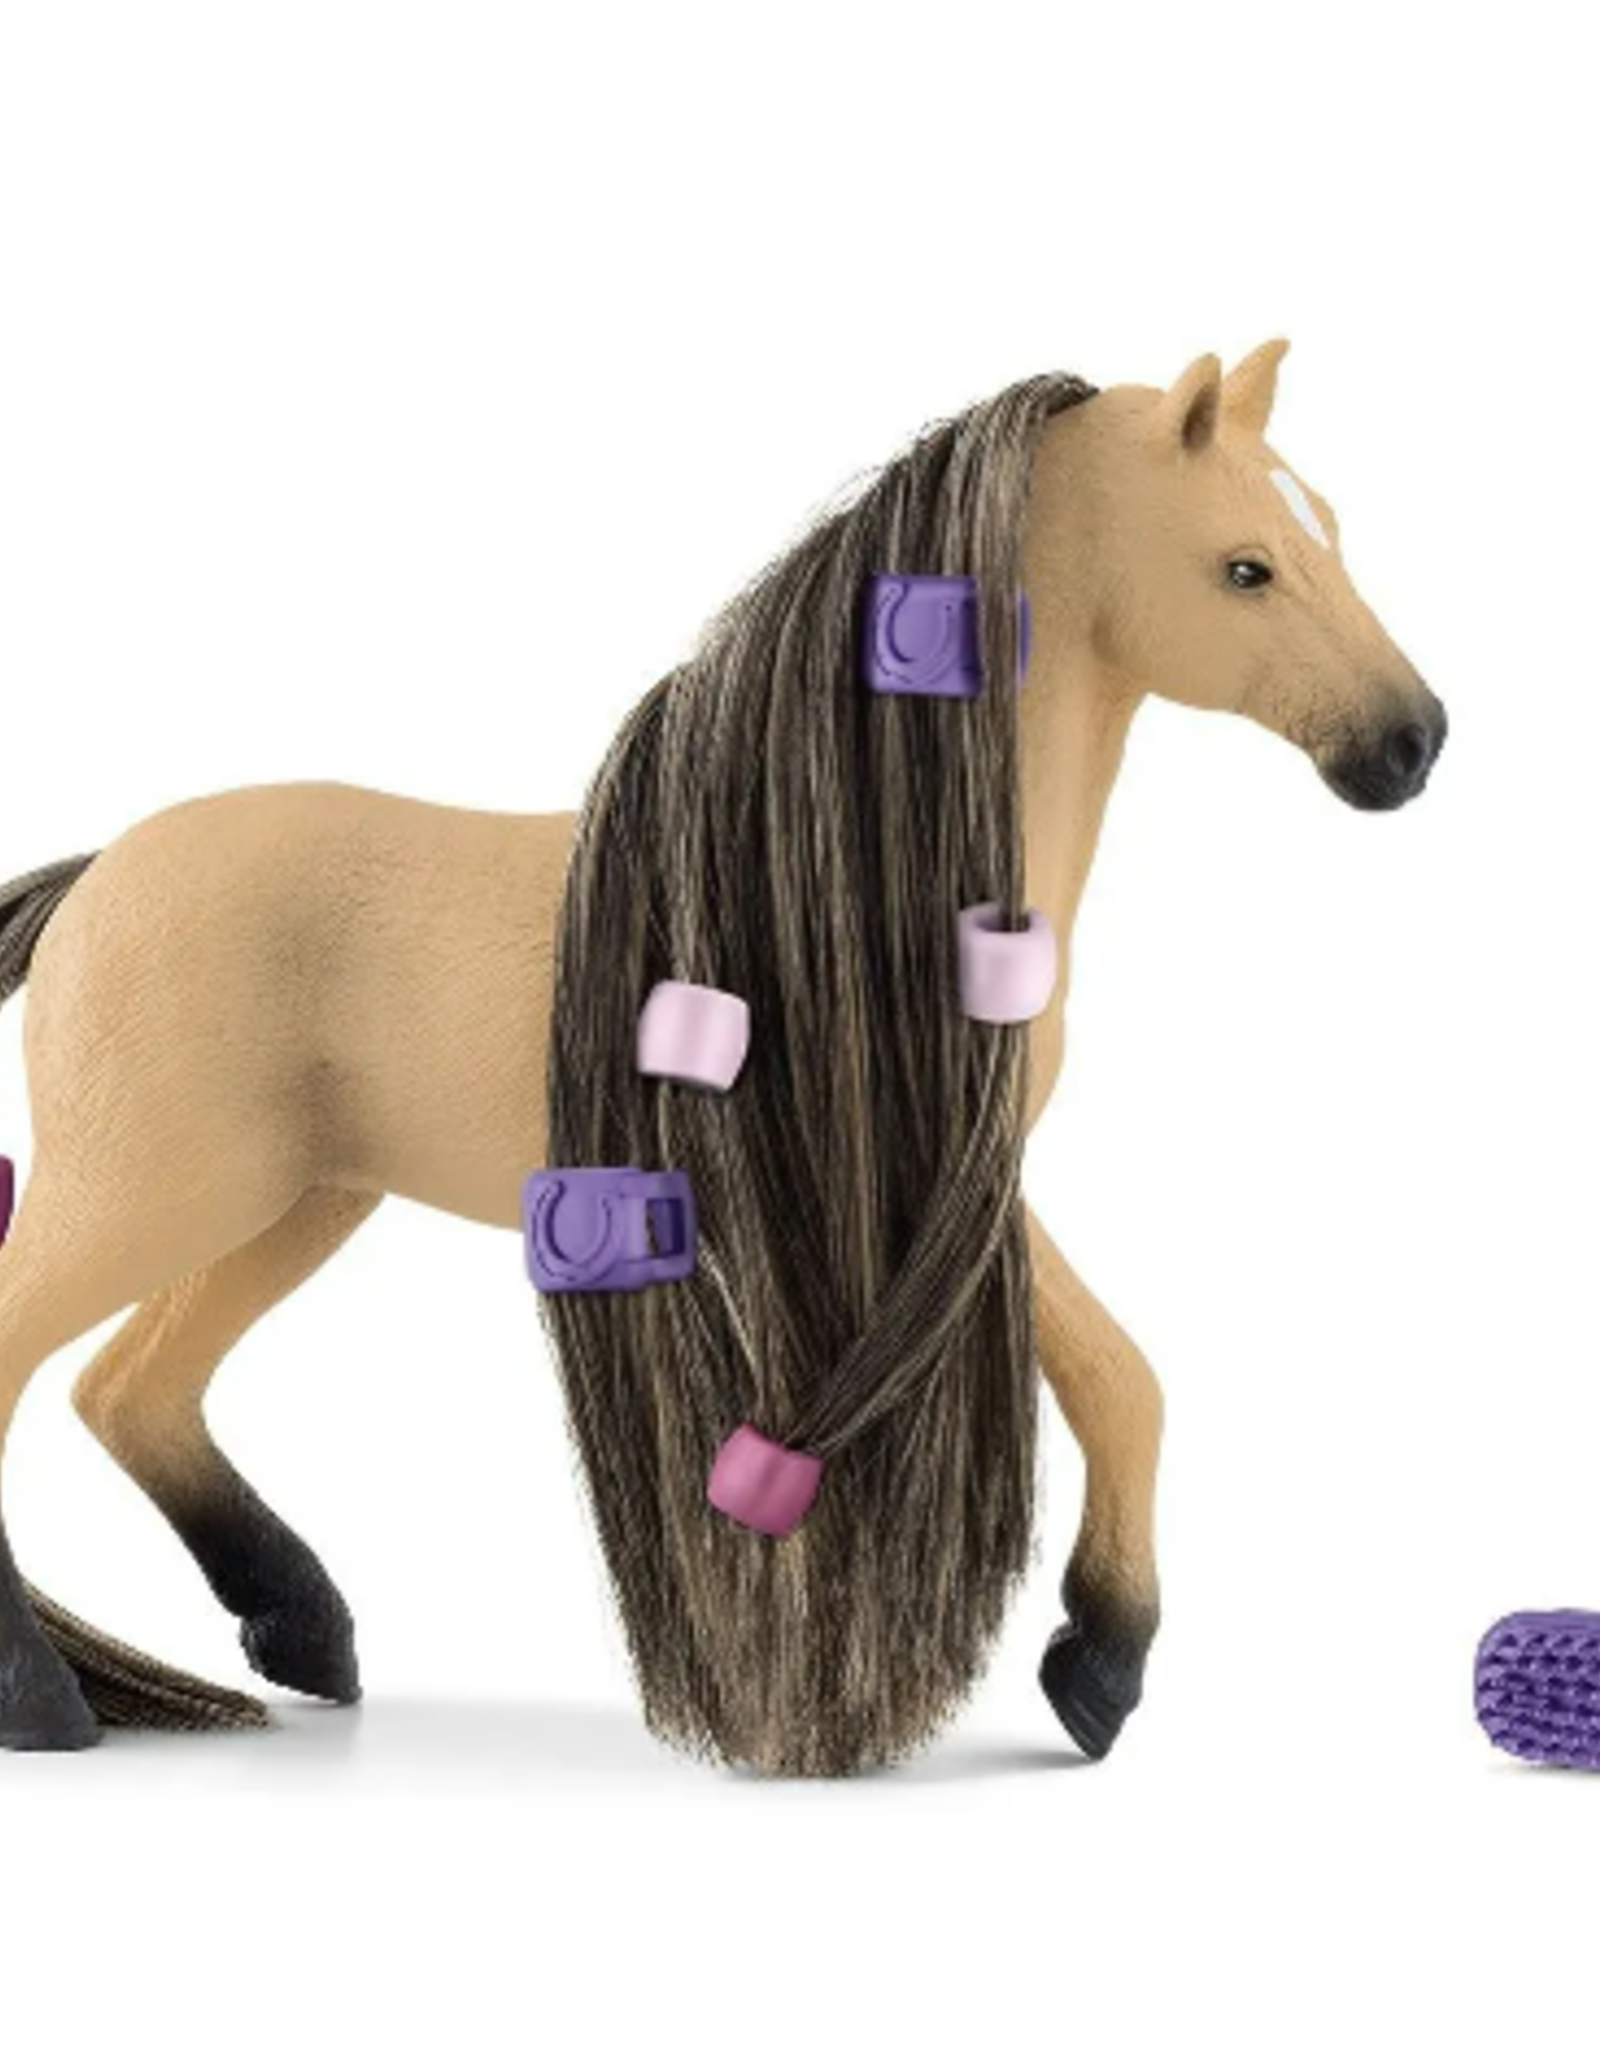 SCHLEICH BEAUTY HORSE ANDALUSIAN MARE